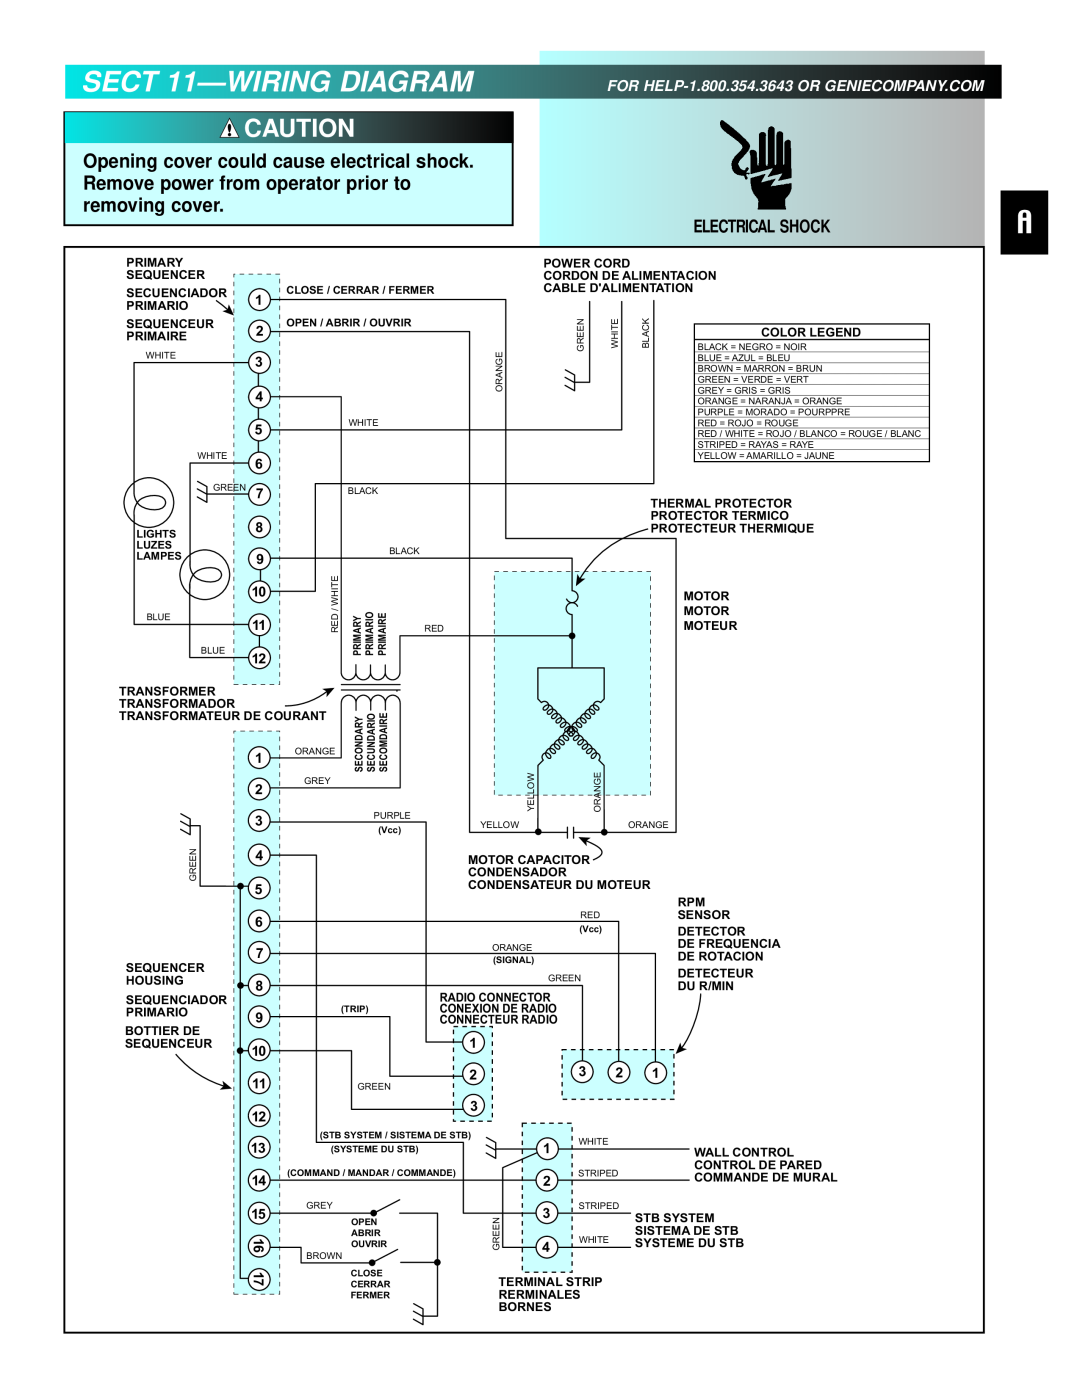 Genie 3511035556 manual SECT 11-WIRING DIAGRAM, Electrical Shock, FOR HELP-1.800.354.3643 OR GENIECOMPANY.COM 